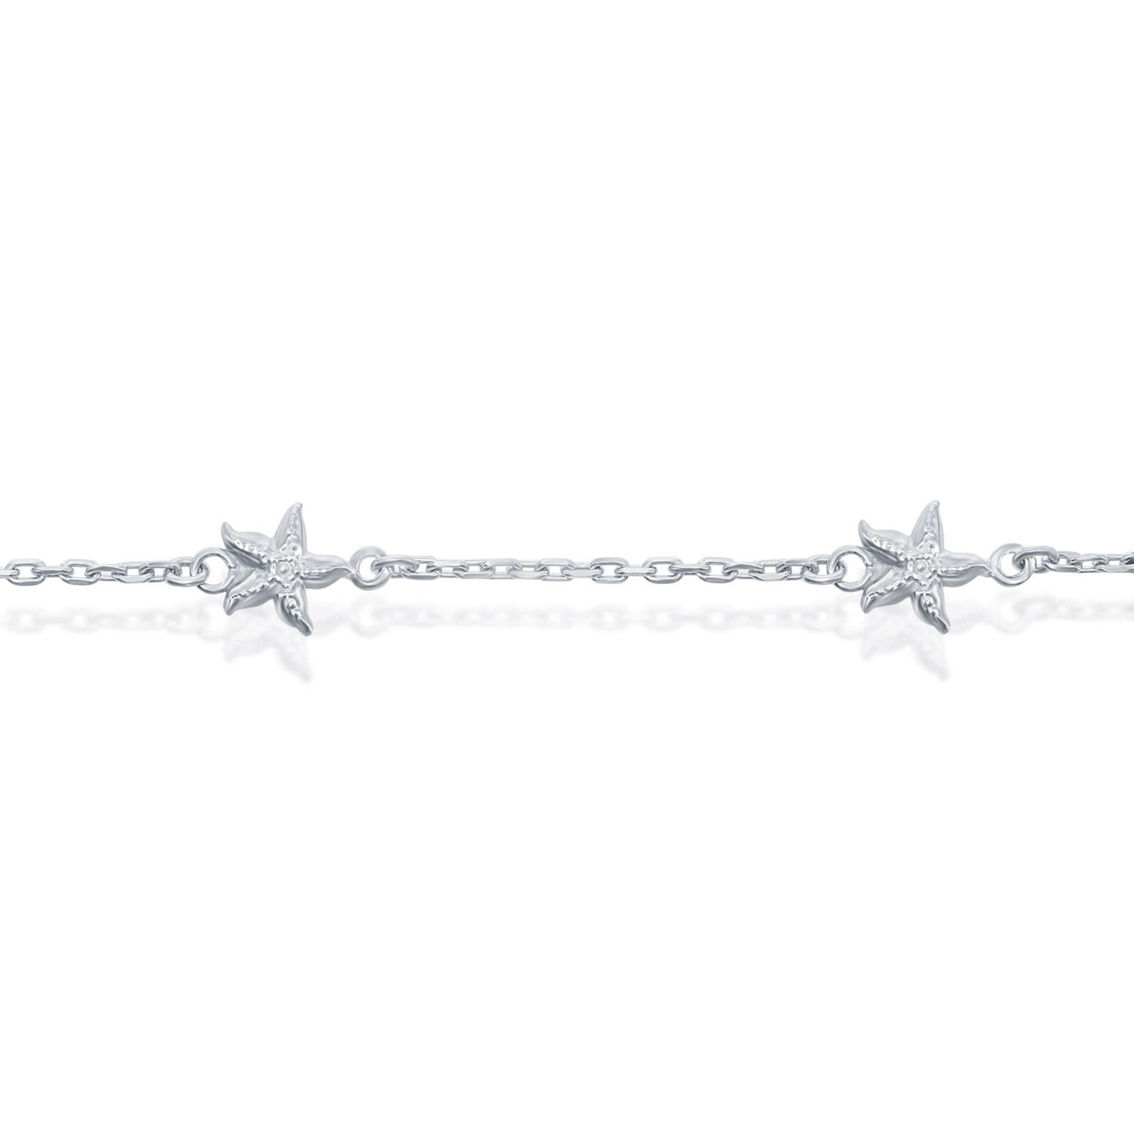 Bella Silver Sterling Silver Starfish Anklet - Image 2 of 3